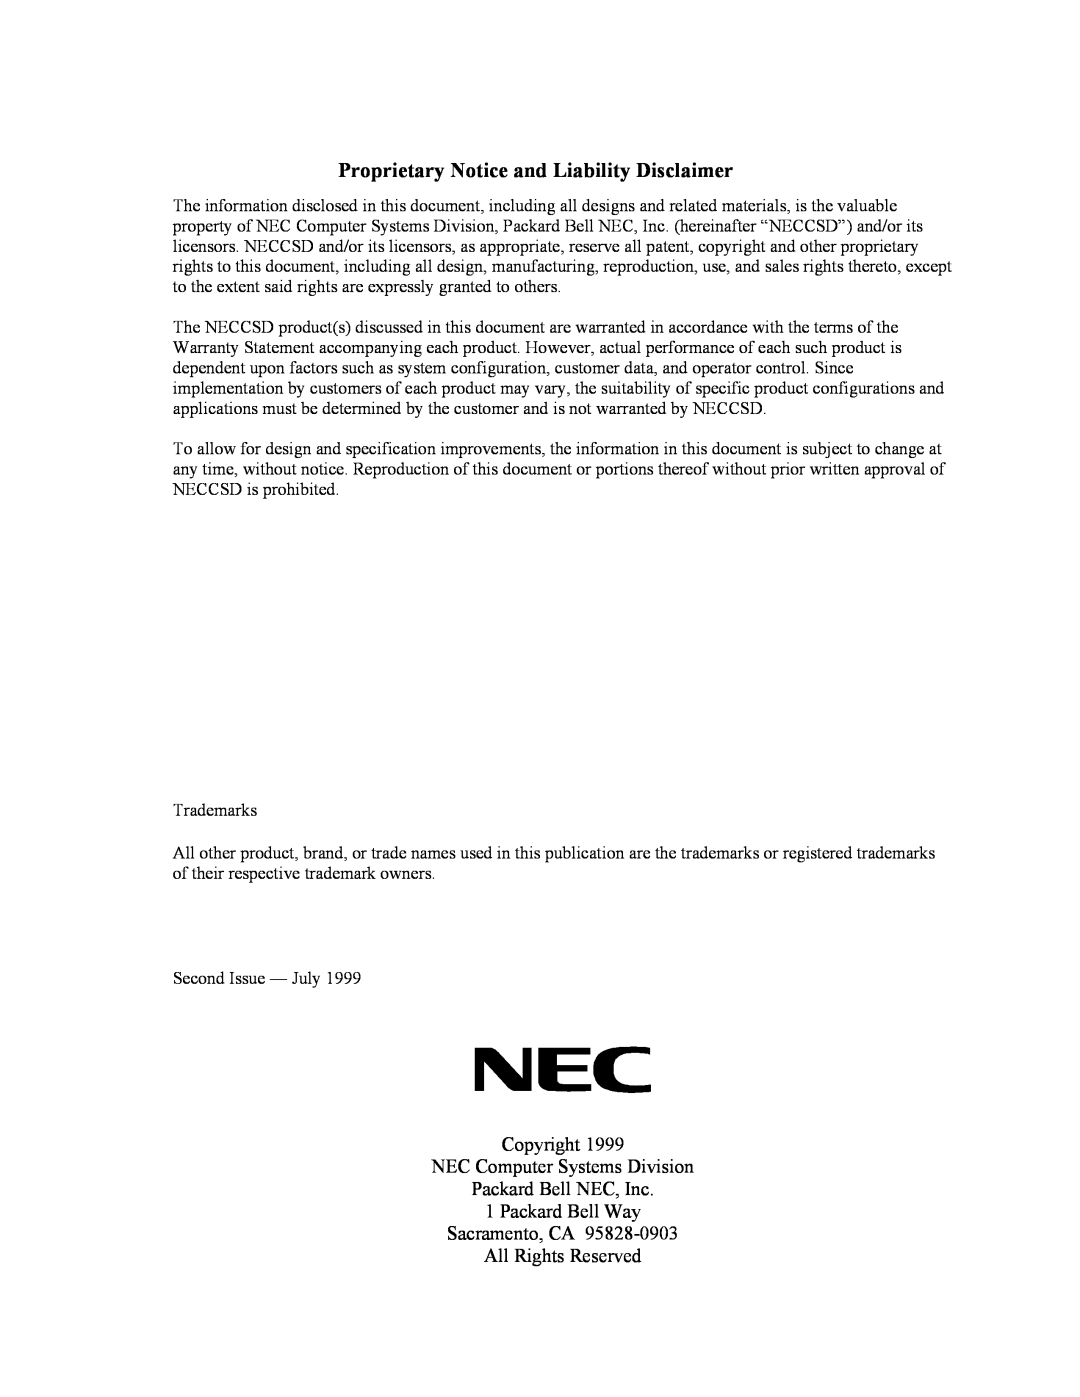 NEC HV8600 Proprietary Notice and Liability Disclaimer, Copyright NEC Computer Systems Division Packard Bell NEC, Inc 